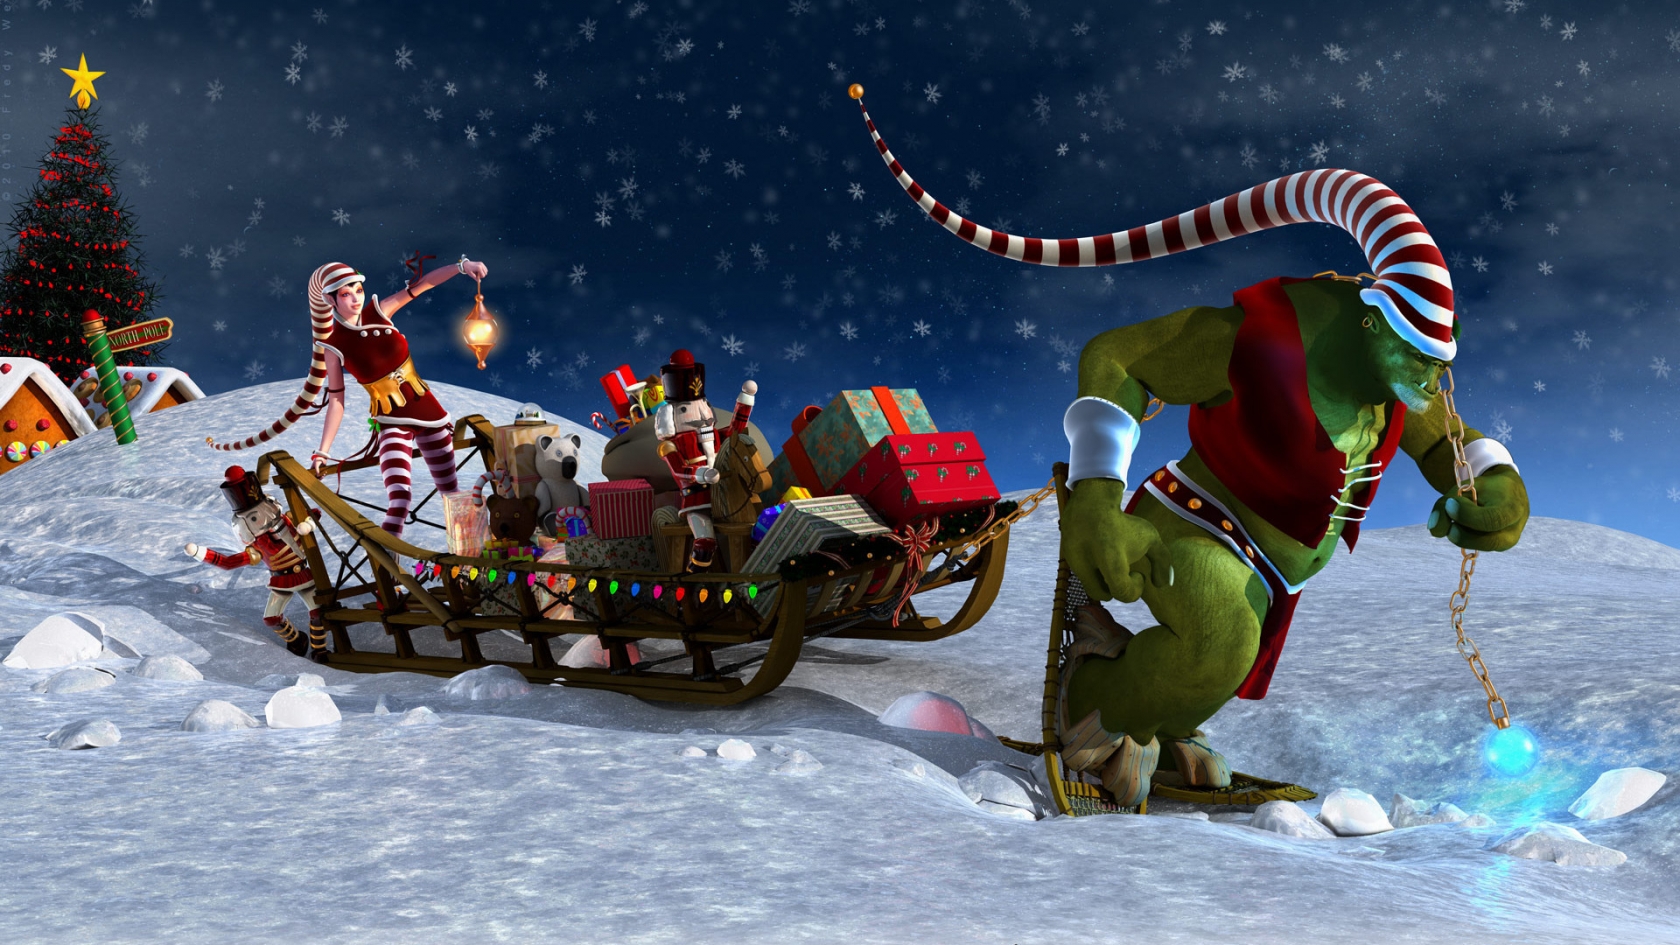 Santa Last Minute Delivery for 1680 x 945 HDTV resolution